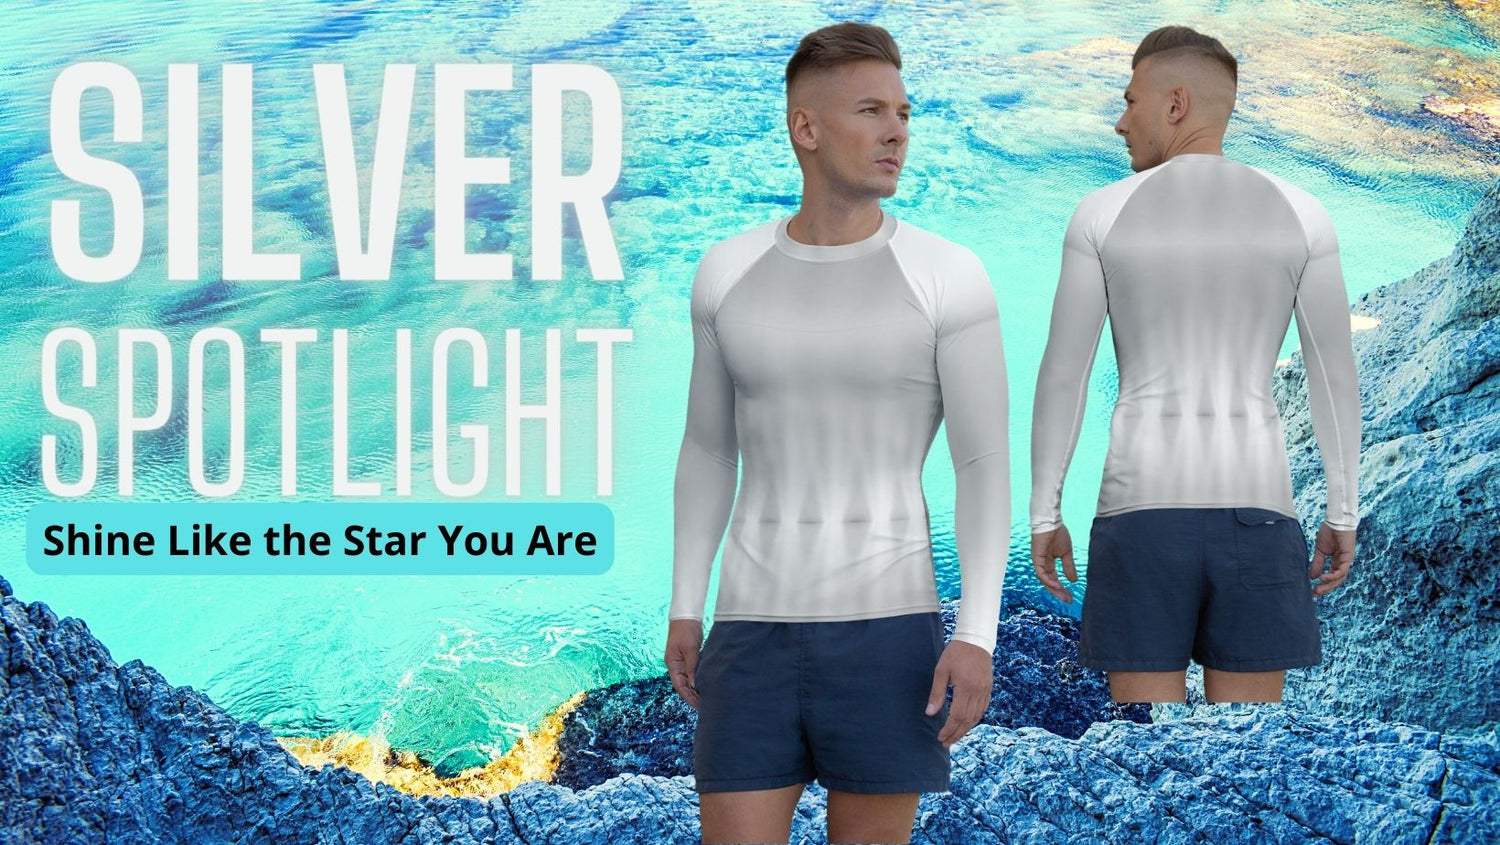 Vibrant and dynamic swimwear from Spotlyght Seeker, designed to make a bold statement and attract attention for the male artist whose birthright is the spotlight.